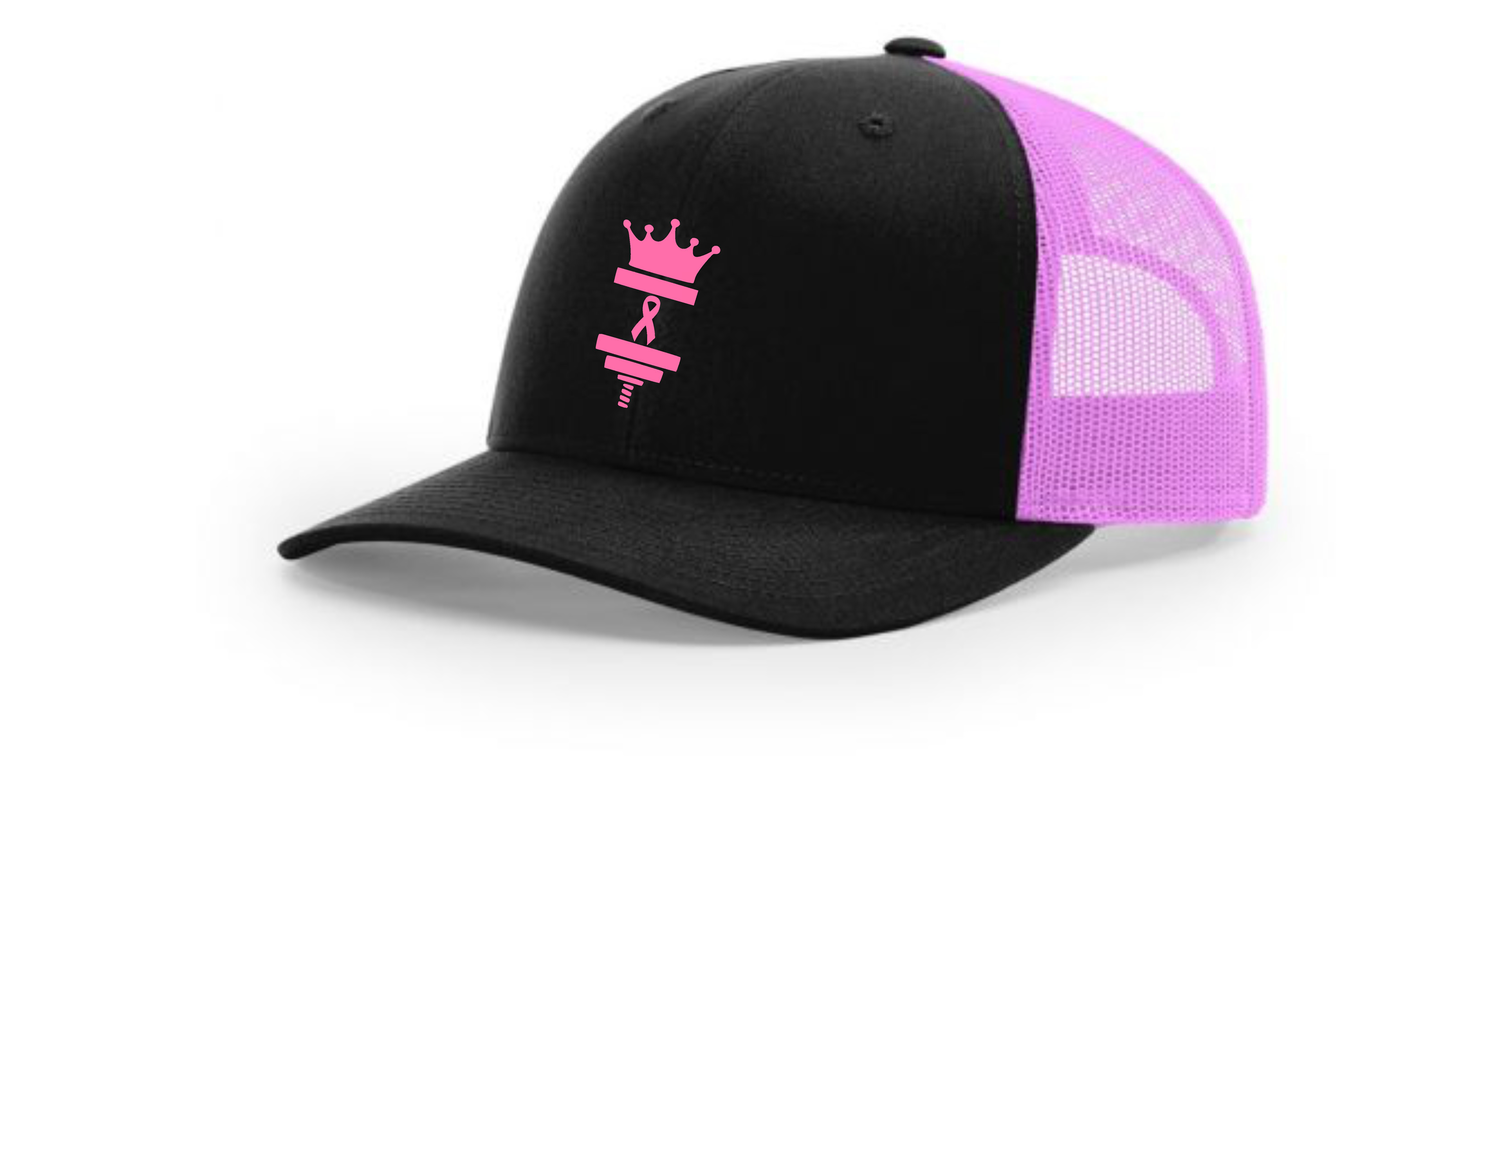 Mpower Your Beast Breast Cancer Awareness Hats Mpower Your Beast